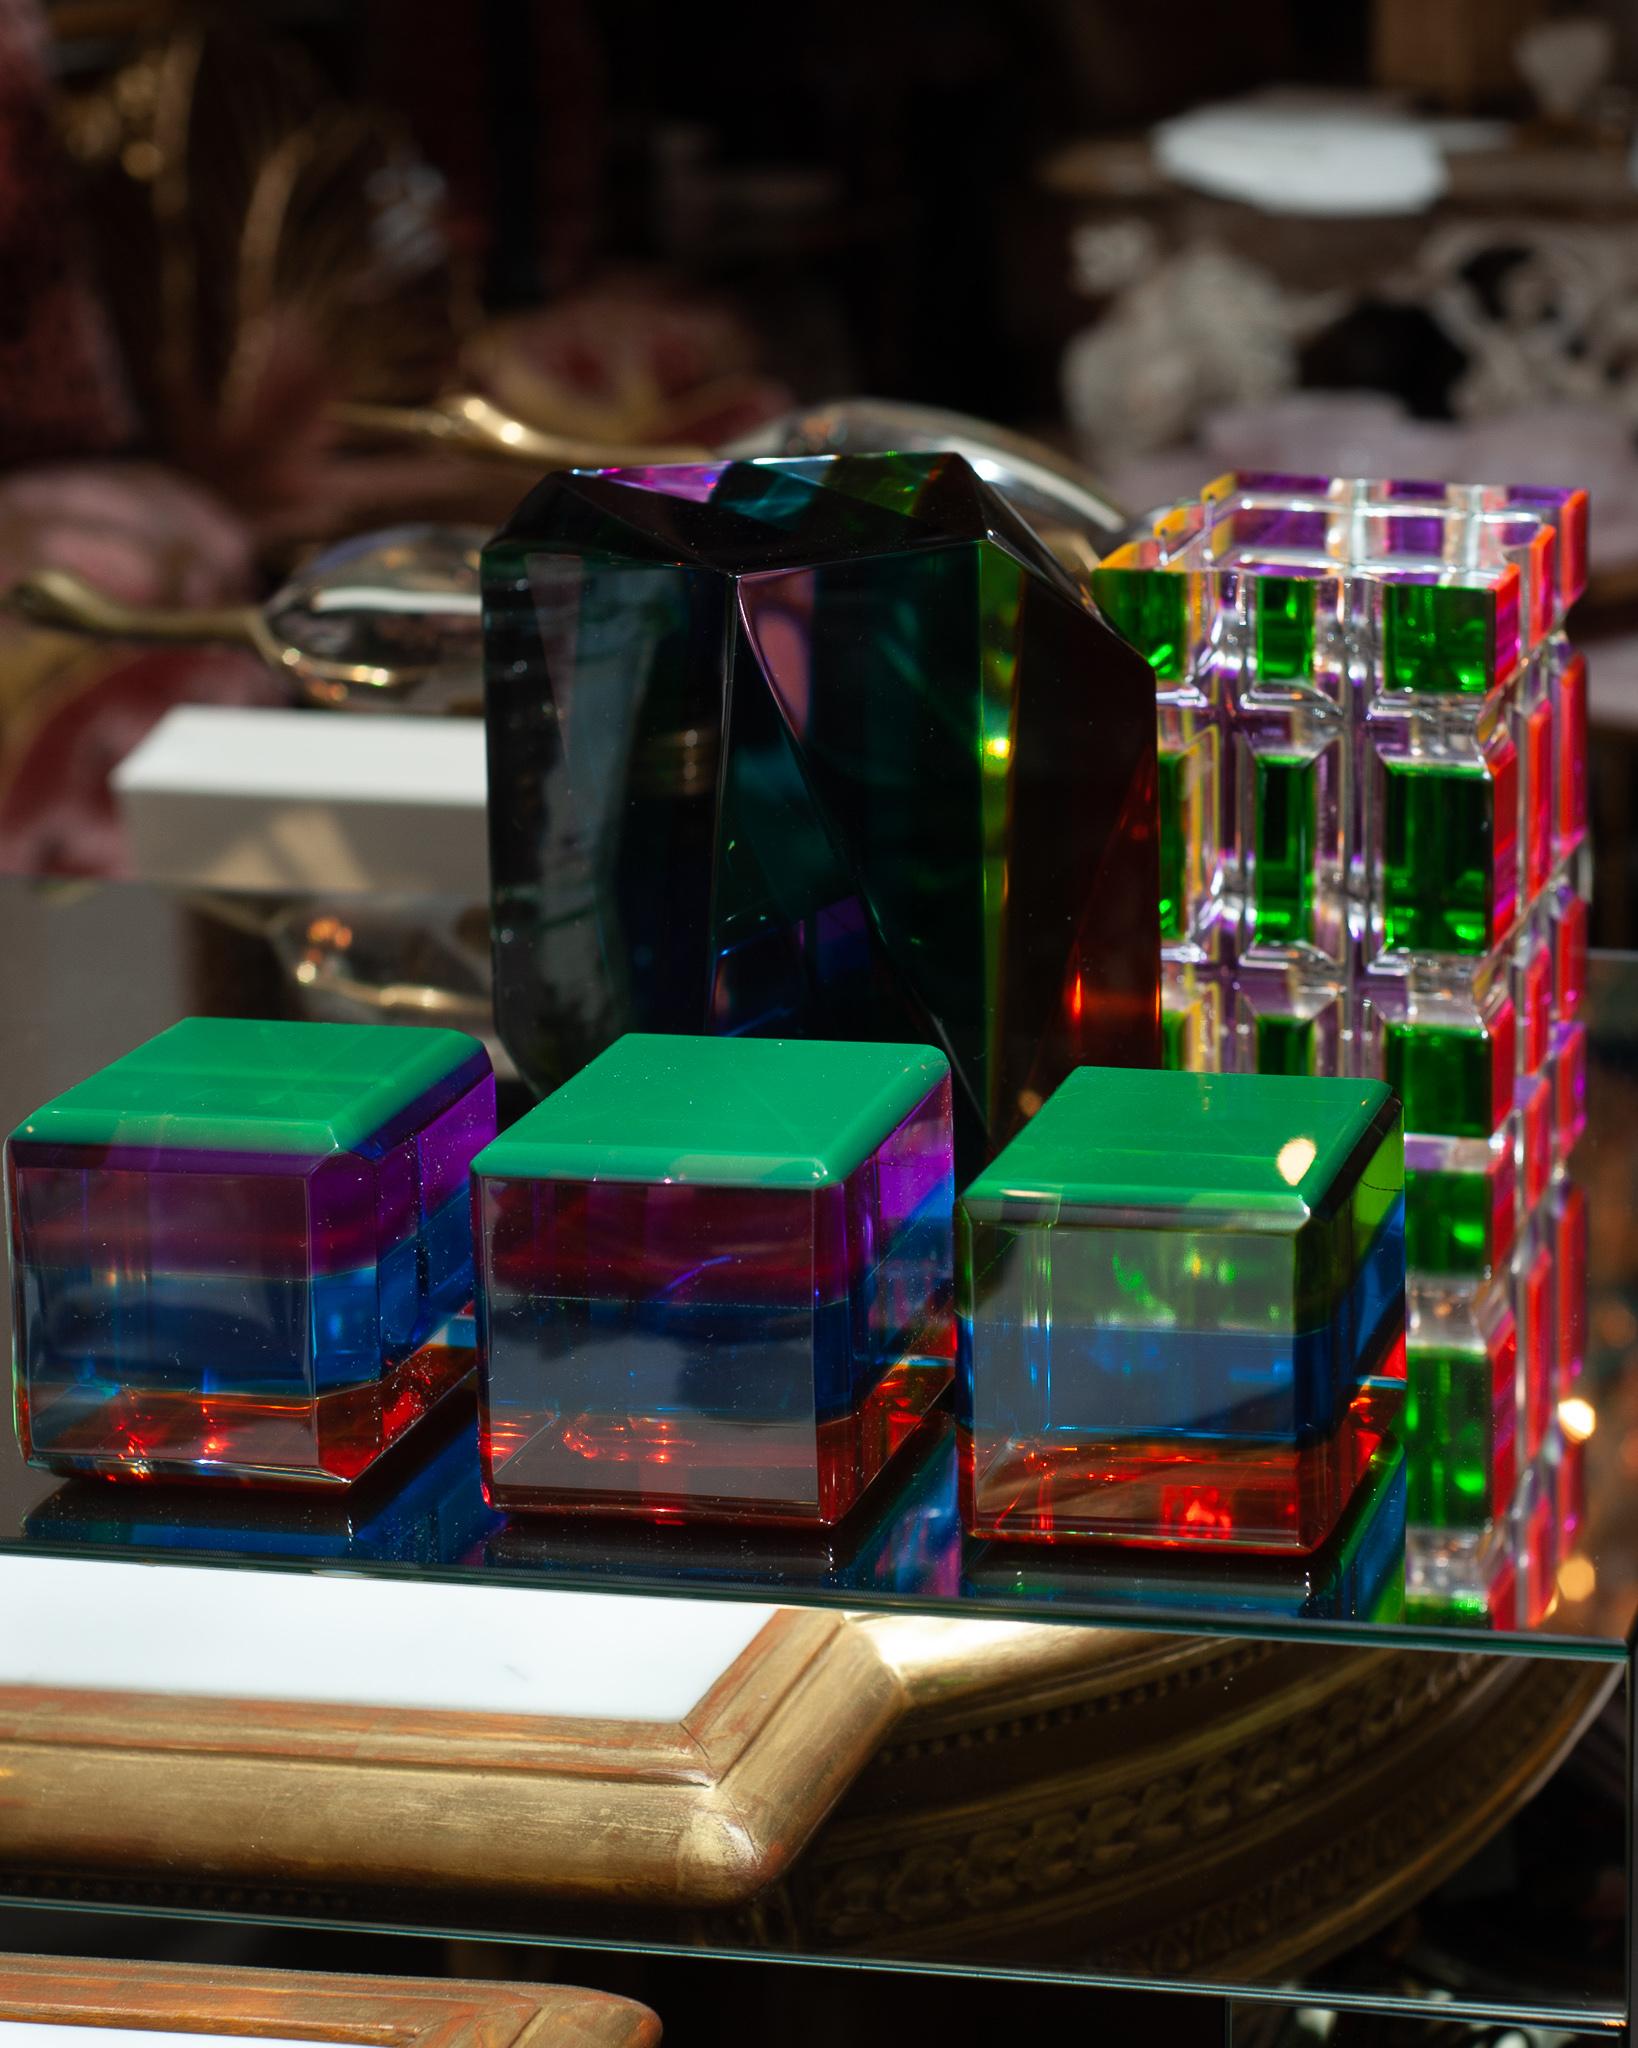 American Contemporary Faceted Multicolour Acrylic Cube Block For Sale